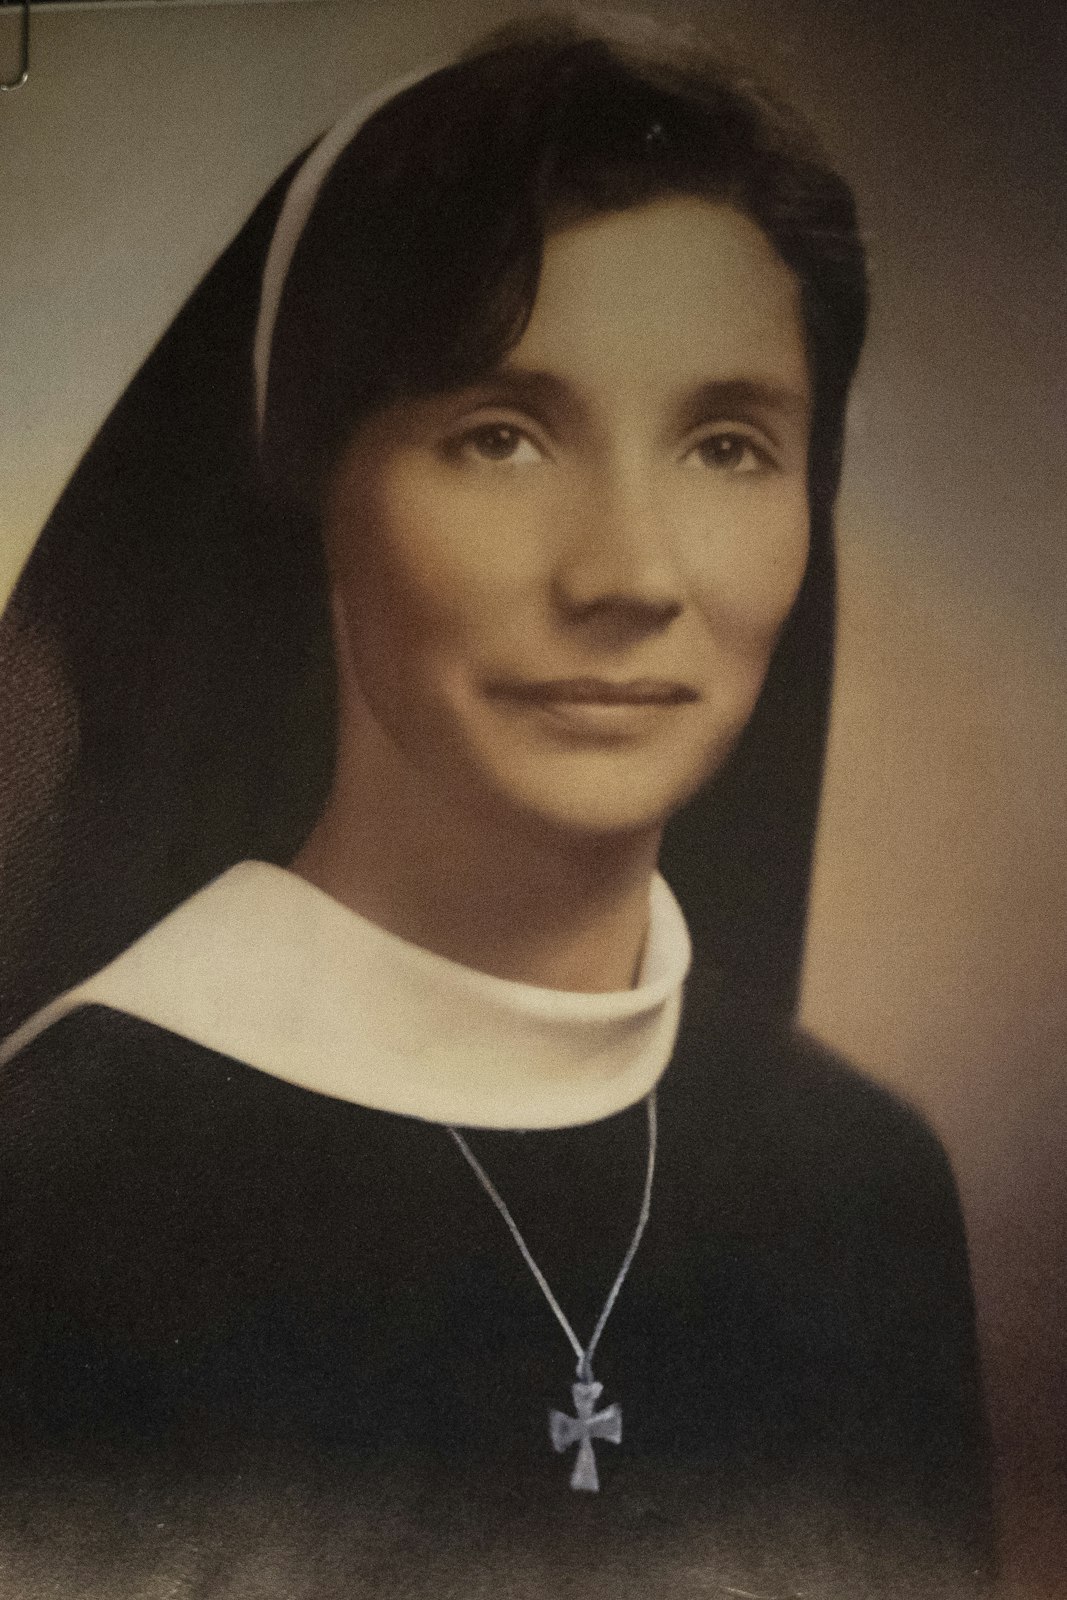 Sr. Magrie joined the IHM Sisters in 1955 at age 18. At the time she was known as Sr. Cecilia Mary. (Photo courtesy of the IHM Sisters)